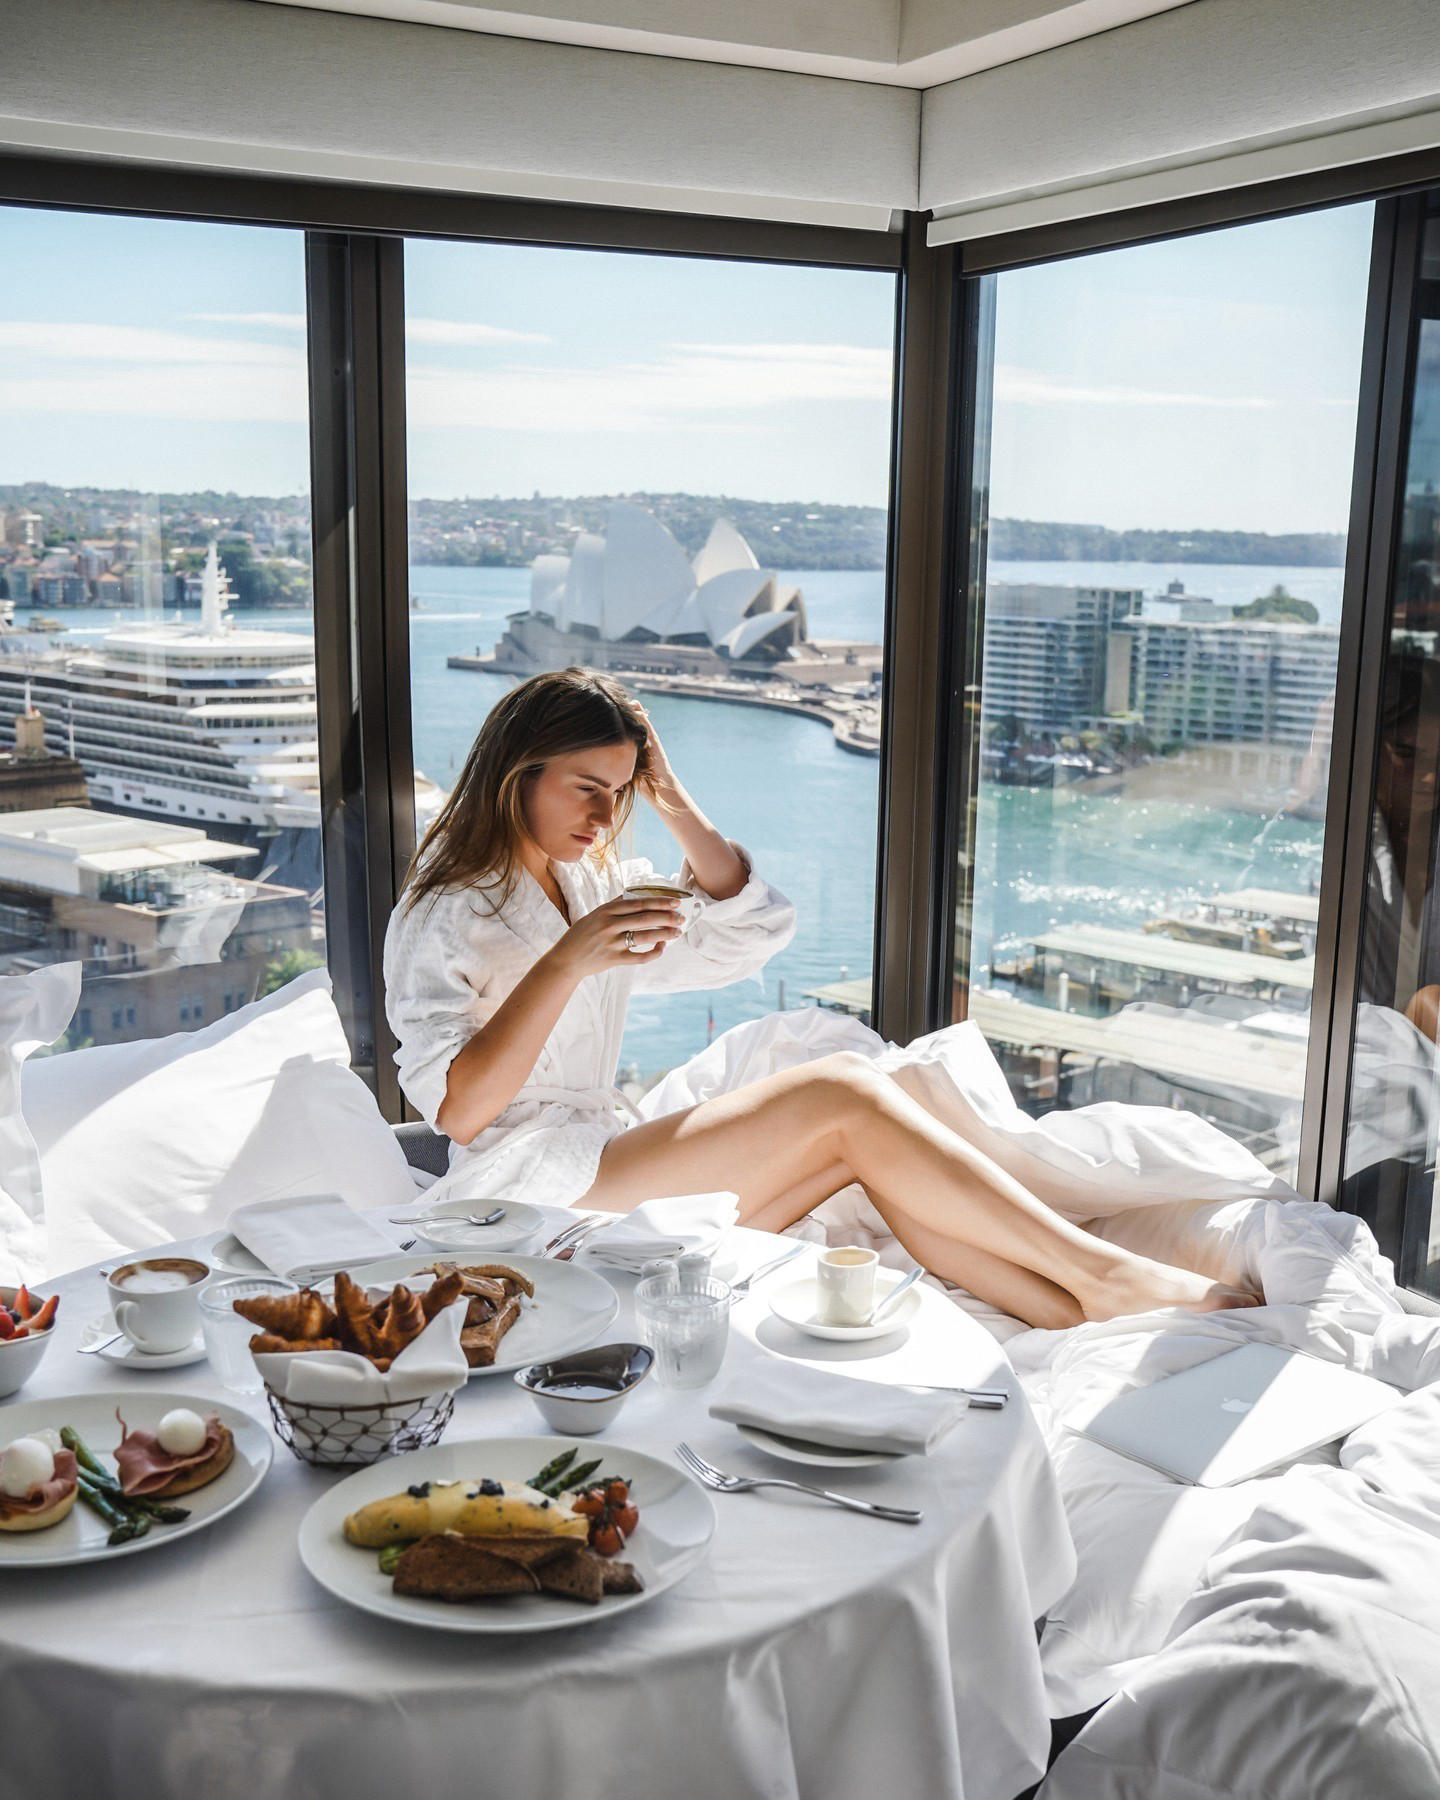 image  1 Four Seasons Hotel Sydney - Nothing feels better than waking up to an array of breakfasts in bed ove